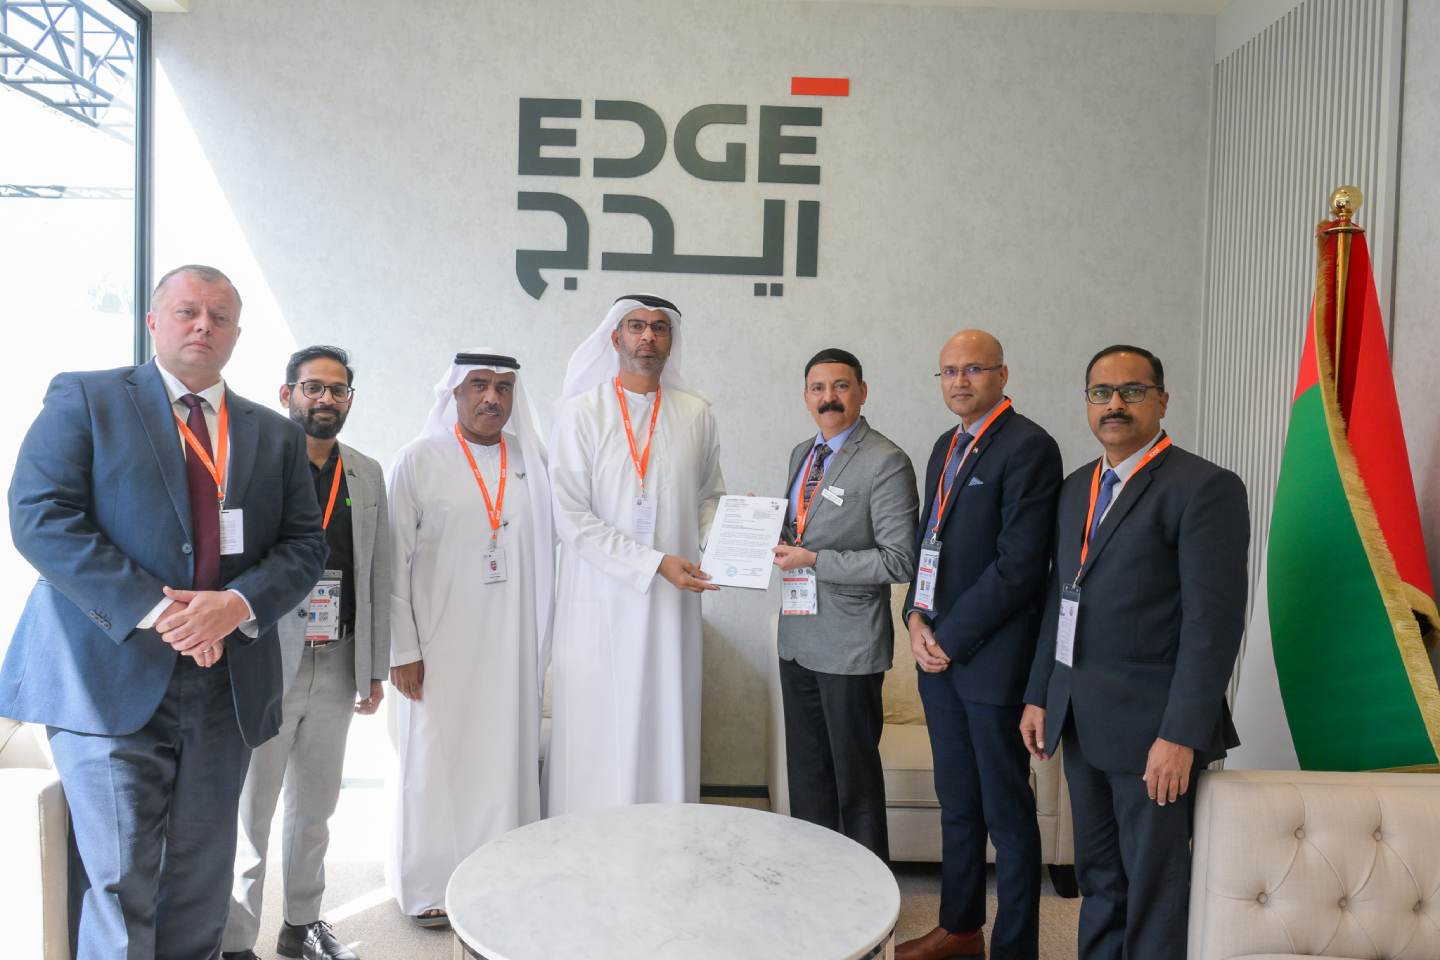 EDGE appointed as an Official Representative of Bharat Dynamics Limited in the UAE